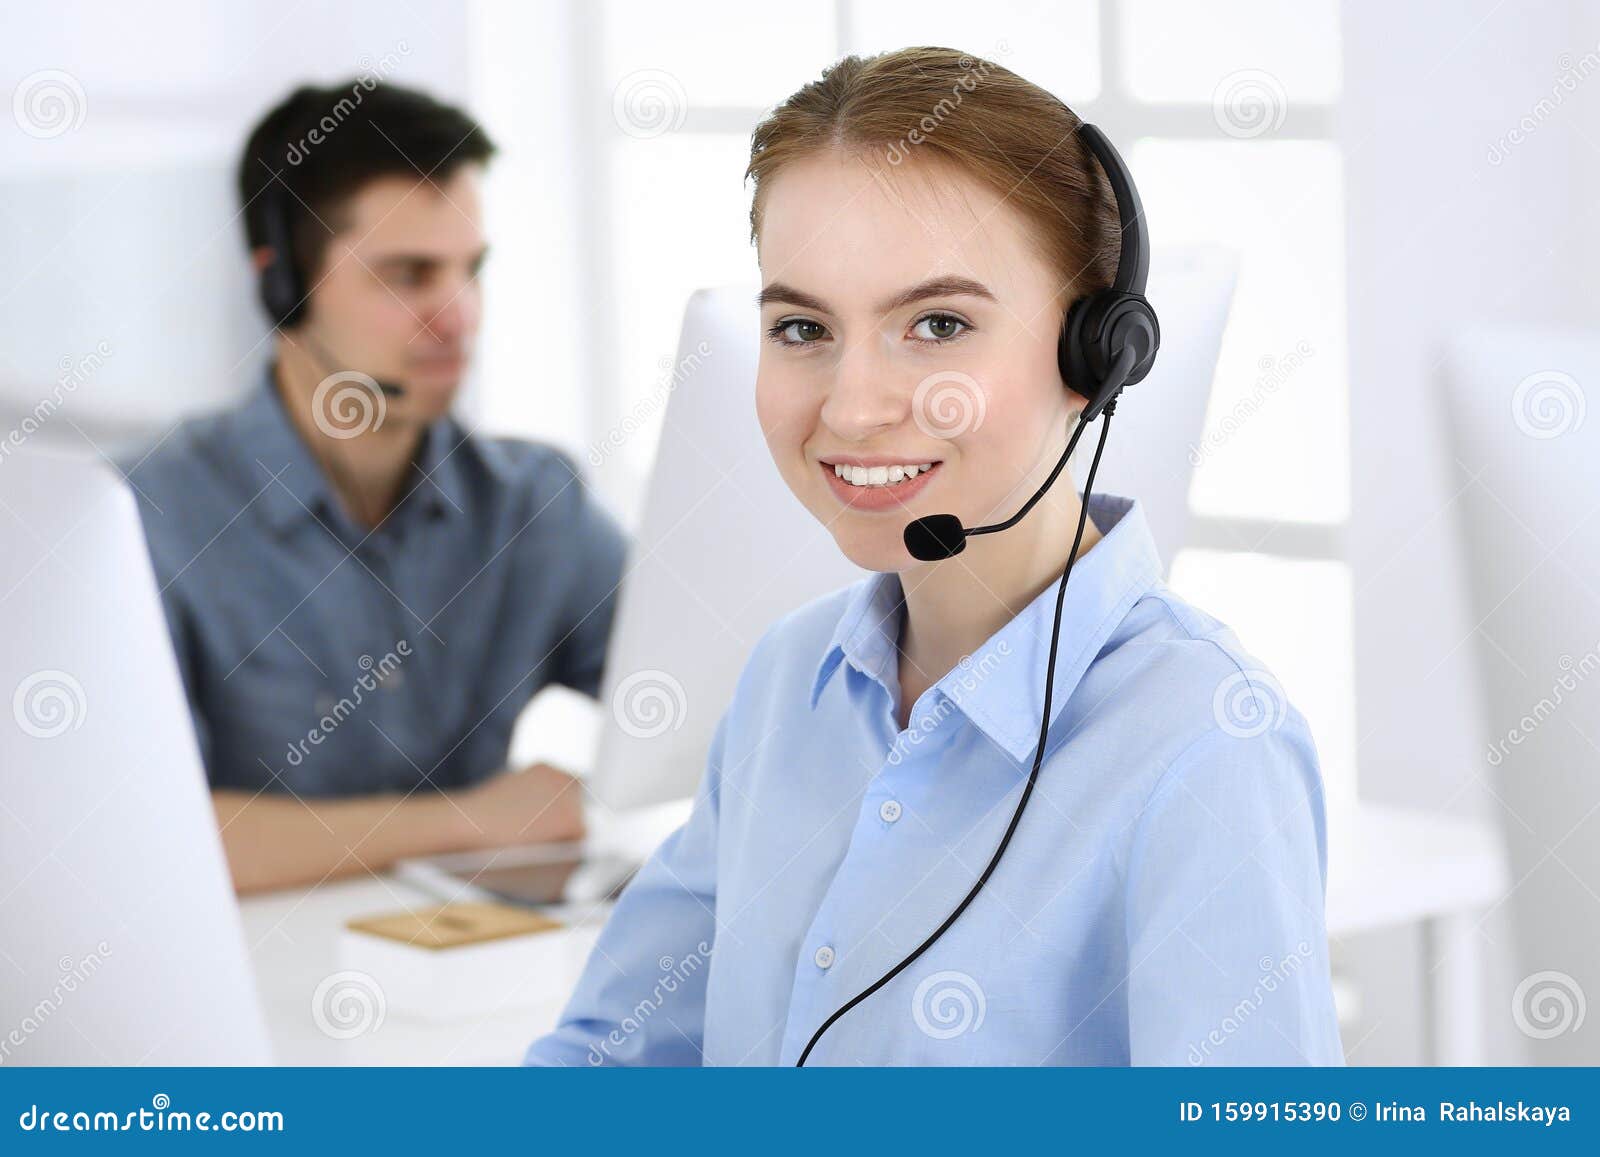 group of operators at work. call center. focus on beautiful woman receptionist in headset at customer service. business